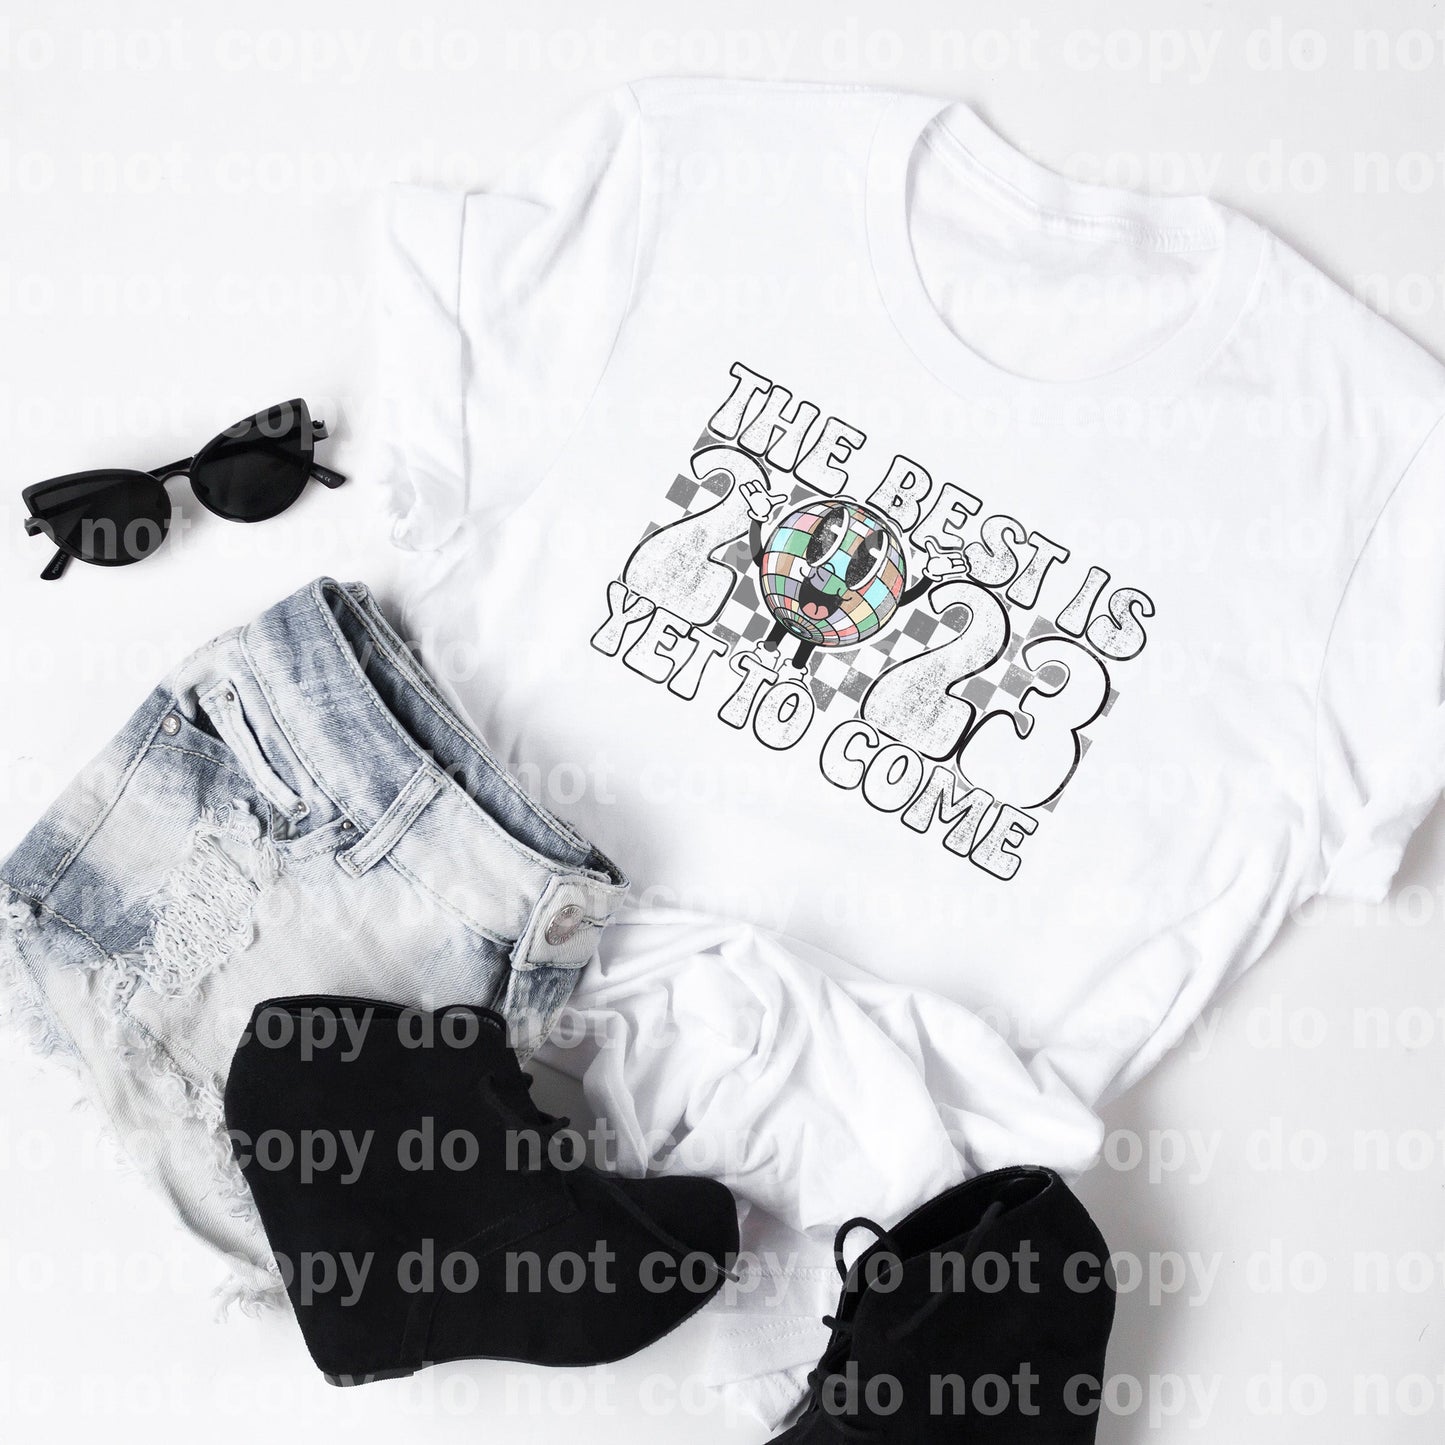 The Best Is 2023 Yet To Come White Disco Ball Distressed Dream Print or Sublimation Print